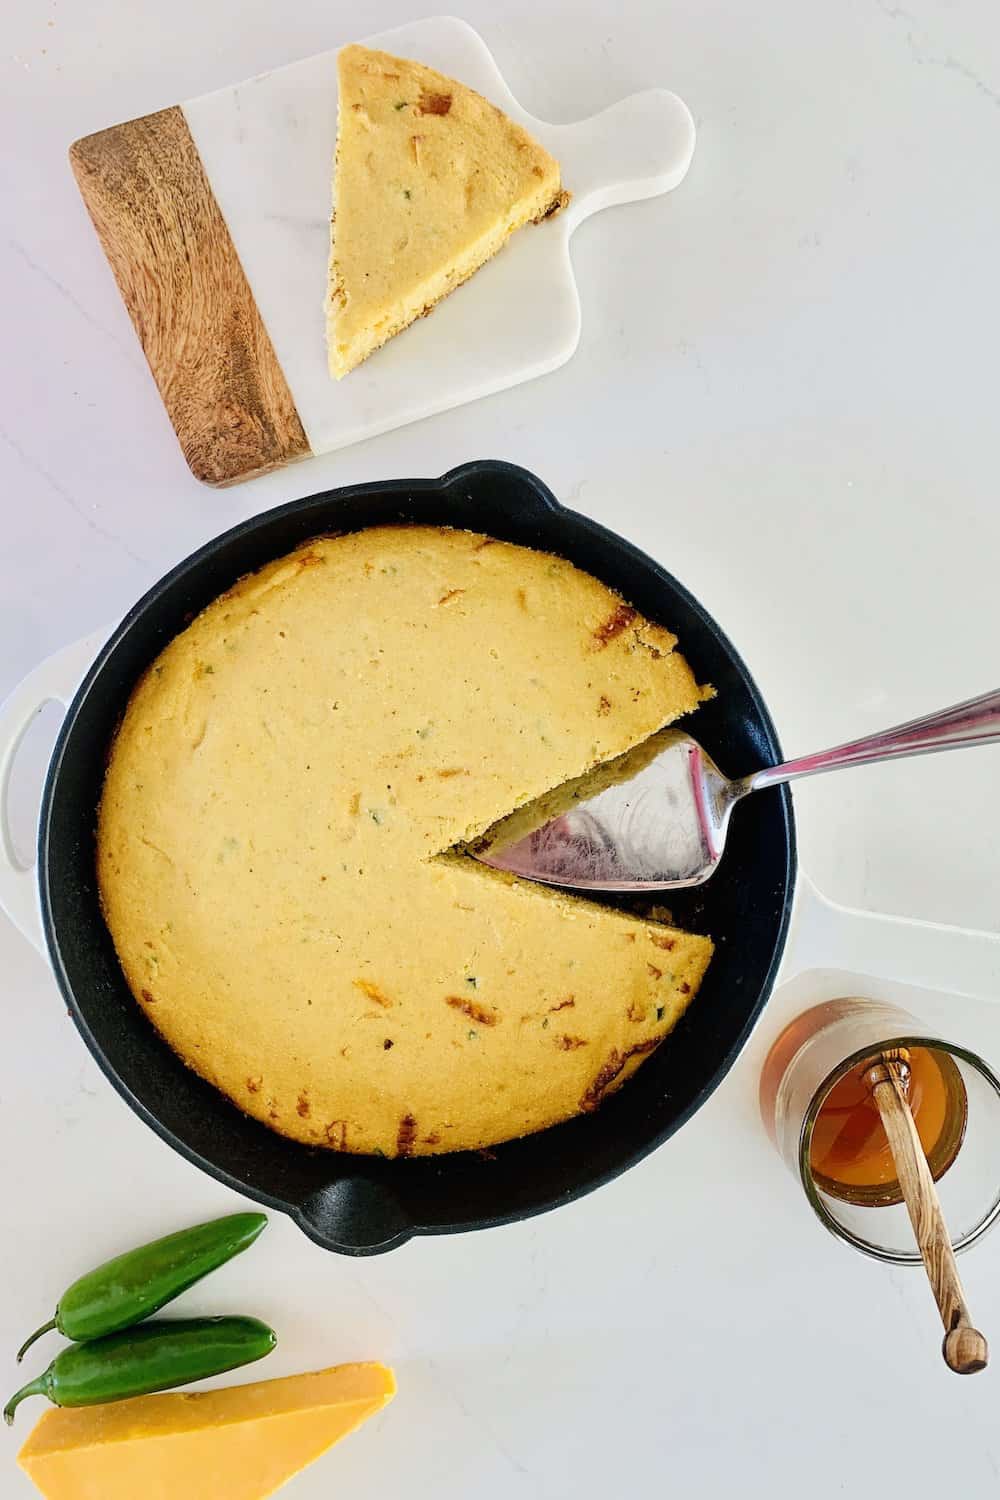 Birds Eye View: gluten-free jalapeño cheddar cornbread in a cast-iron skillet with white enamel. One slice is missing and a metal cake lifter is in its place. A slice of the cornbread on a wooed and marble cuttling board, a wedge of cheddar, 2 green jalapeños, and a glass of honey are on the counter.